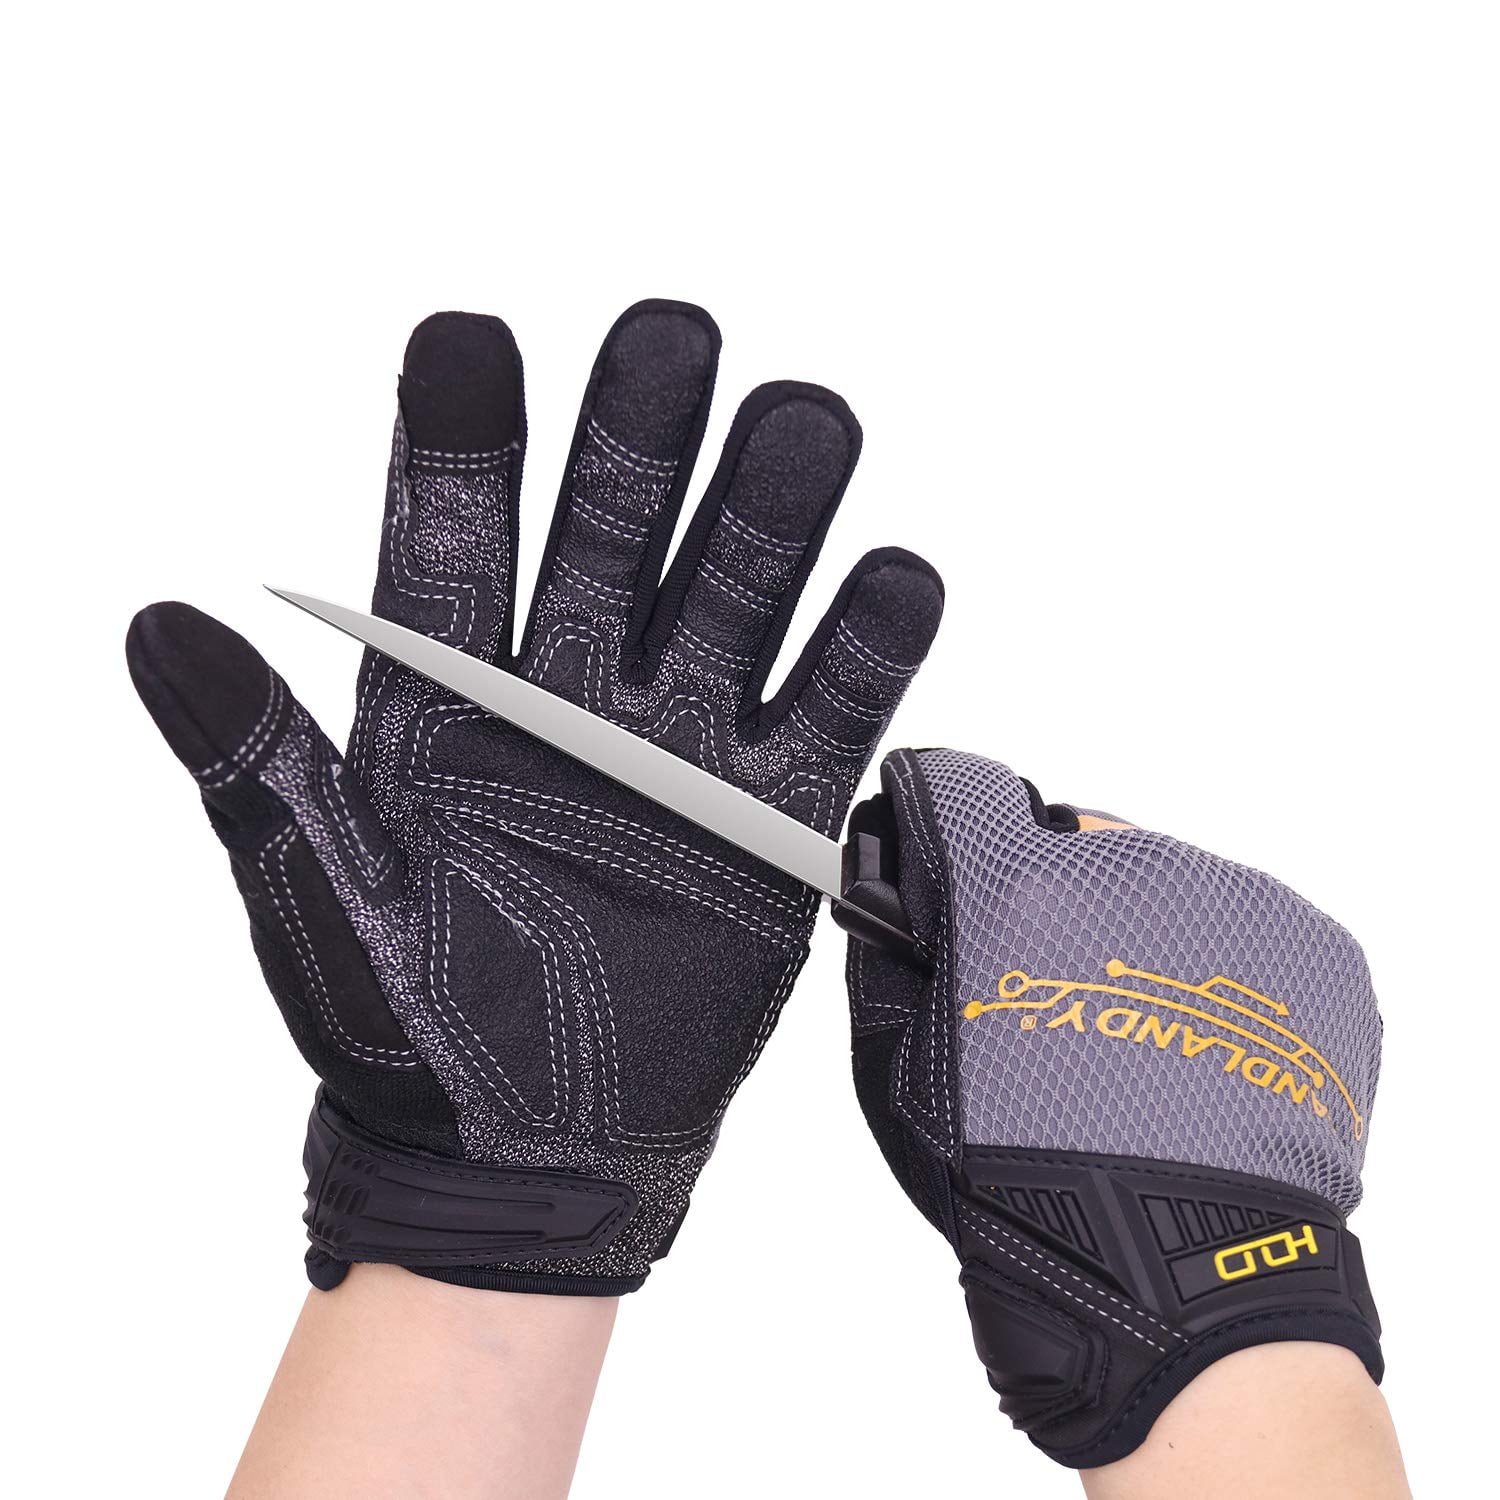 NoCry Cut Resistant Gloves review and demo 